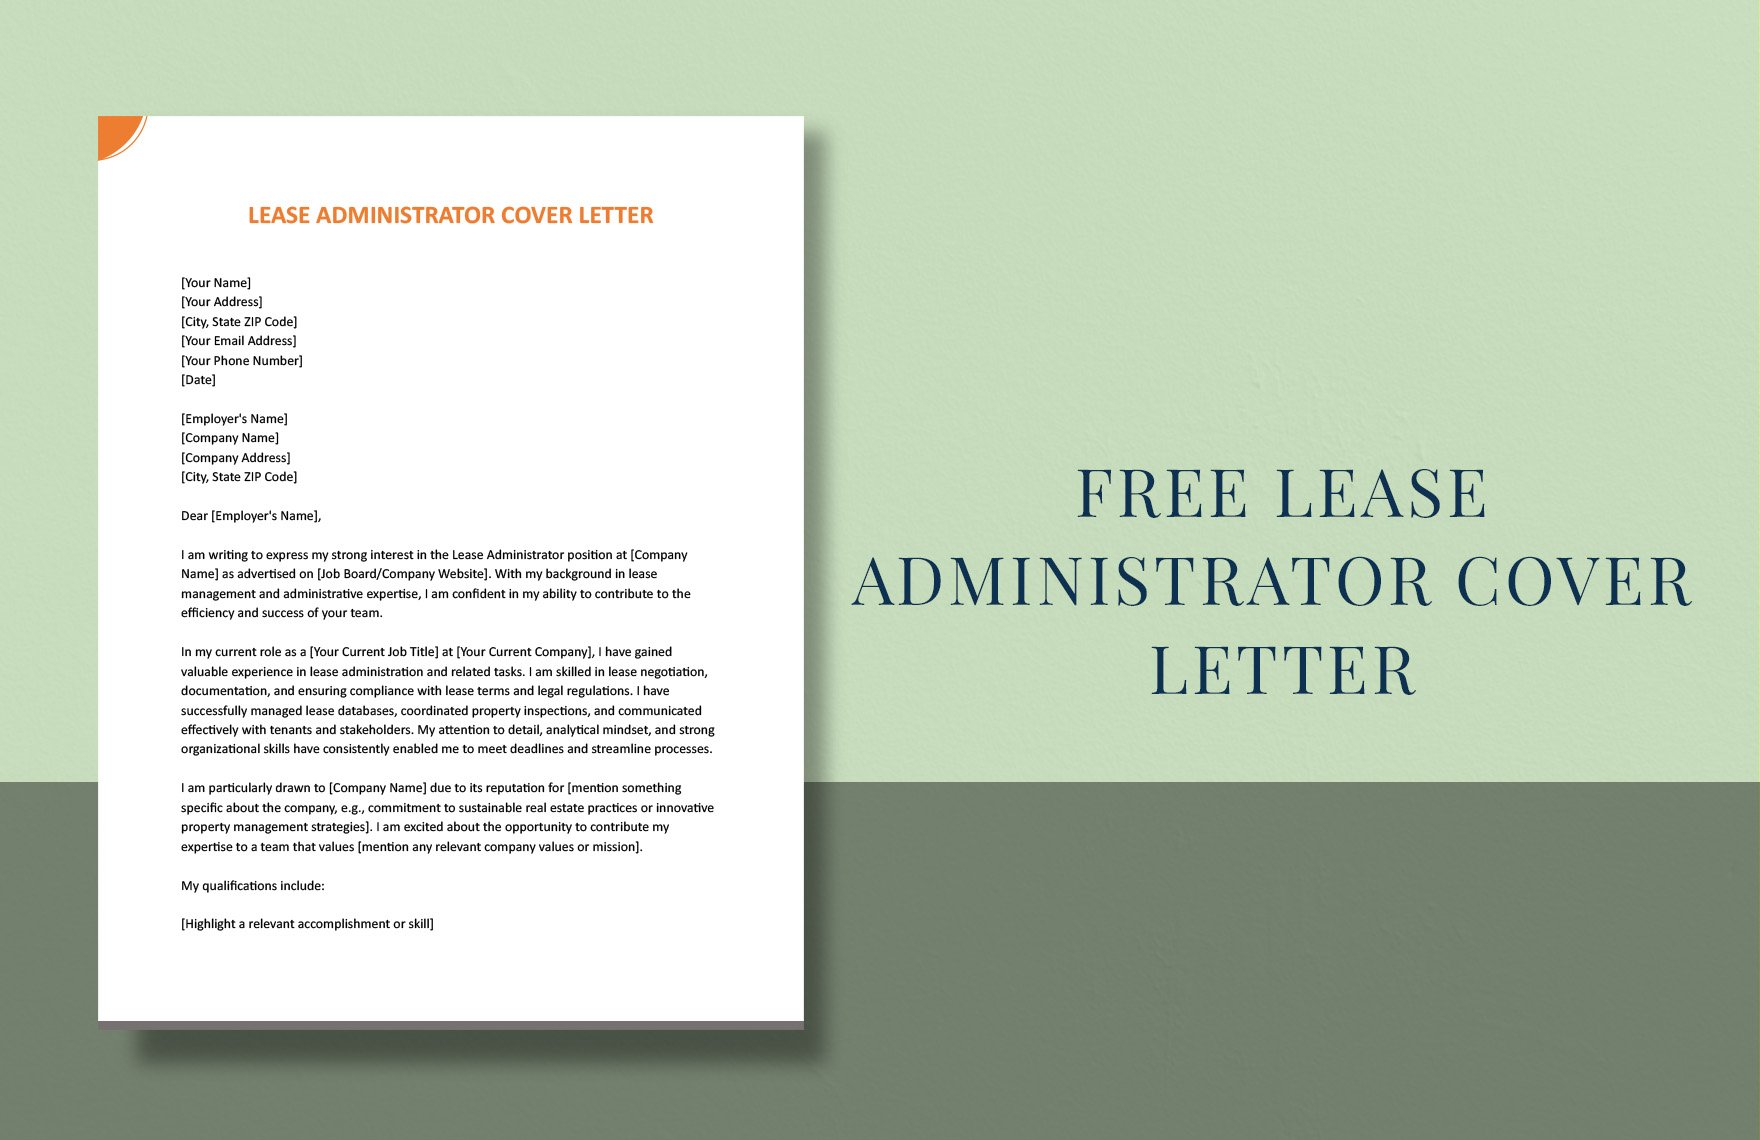 Lease Administrator Cover Letter in Word